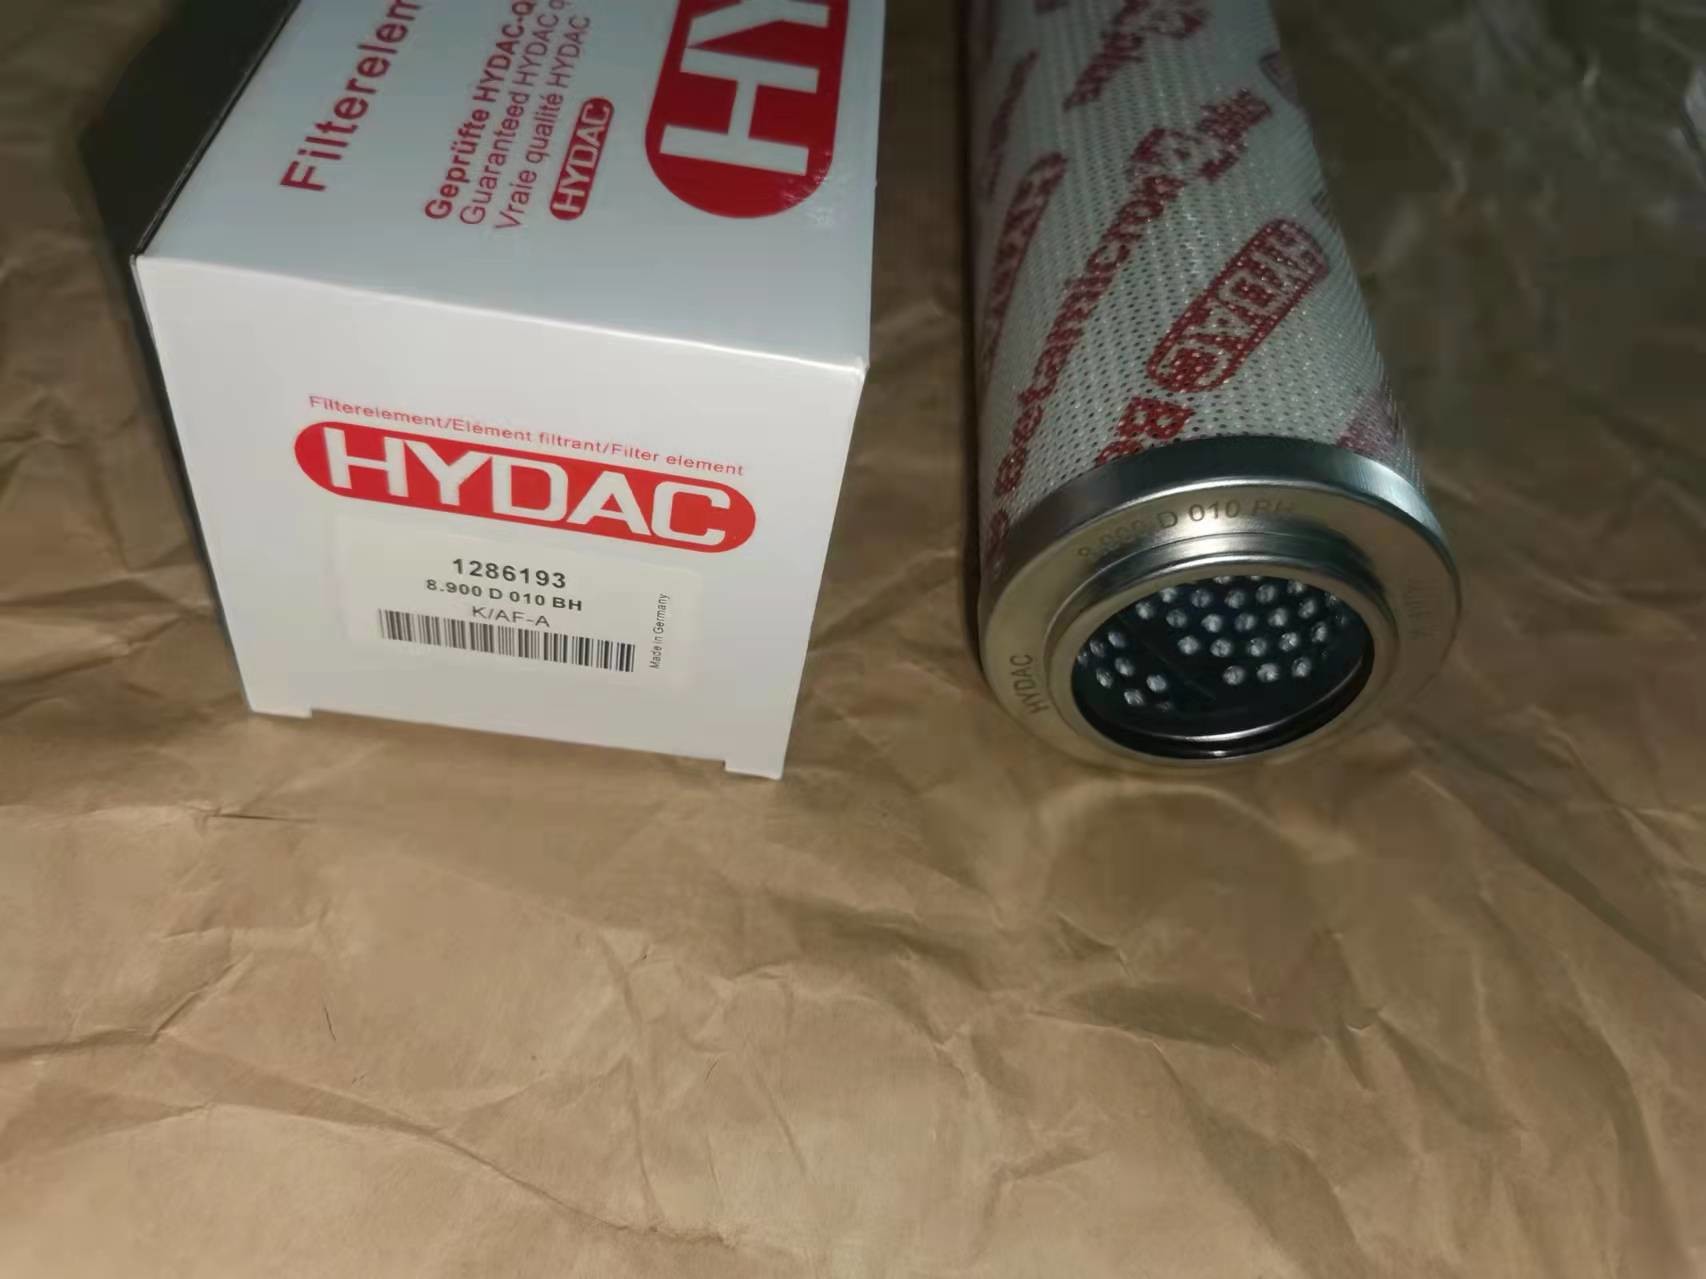 Hydac 1286193 8.900D010BH Pressure Filter Element for sale